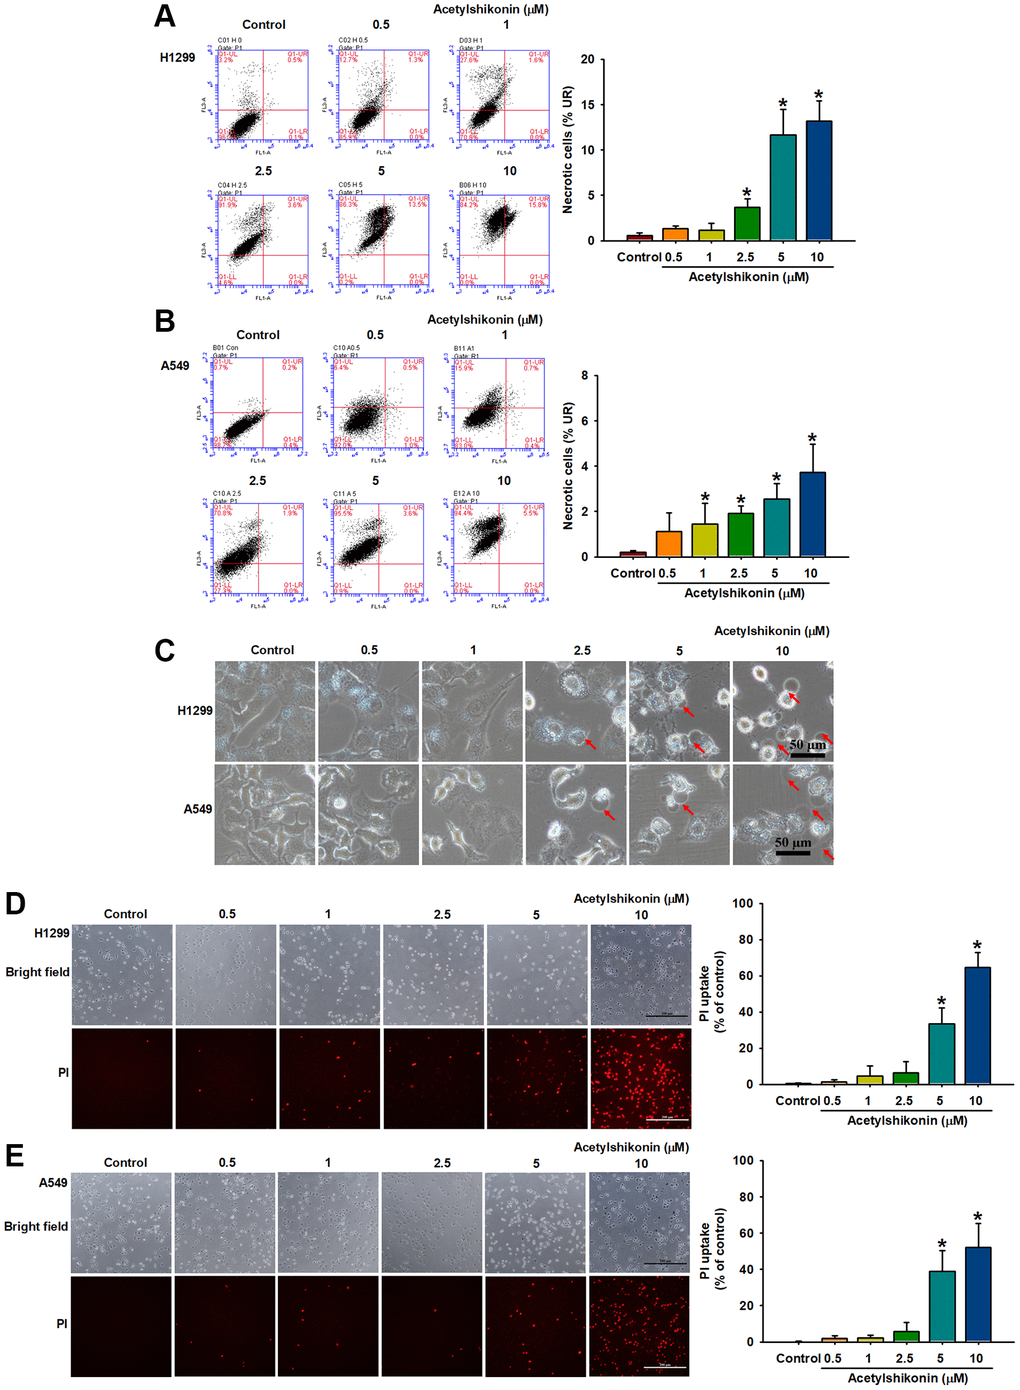 Acetylshikonin increased the membrane permeability of NSCLC cells and the proportion of necrotic NSCLC cells. (A, B) Flow cytometry results for Annexin V/PI showing the incidence of cell death among H1299 and A549 cells following treatment with acetylshikonin (0.5–10 μM) for 24 h (n = 4). (C) Phase microscope images of NSCLC cells following incubation with acetylshikonin (0.5–10 μM) for 24 h. Red arrows indicate swollen blebs. Scale bar = 50 μm. (D, E) PI staining results of H1299 and A549 cells following treatment with acetylshikonin (0.5–10 μM) for 4 h. Scale bar = 200 μm. Untreated cells were used as controls. Results are shown as means ± SD. *p 